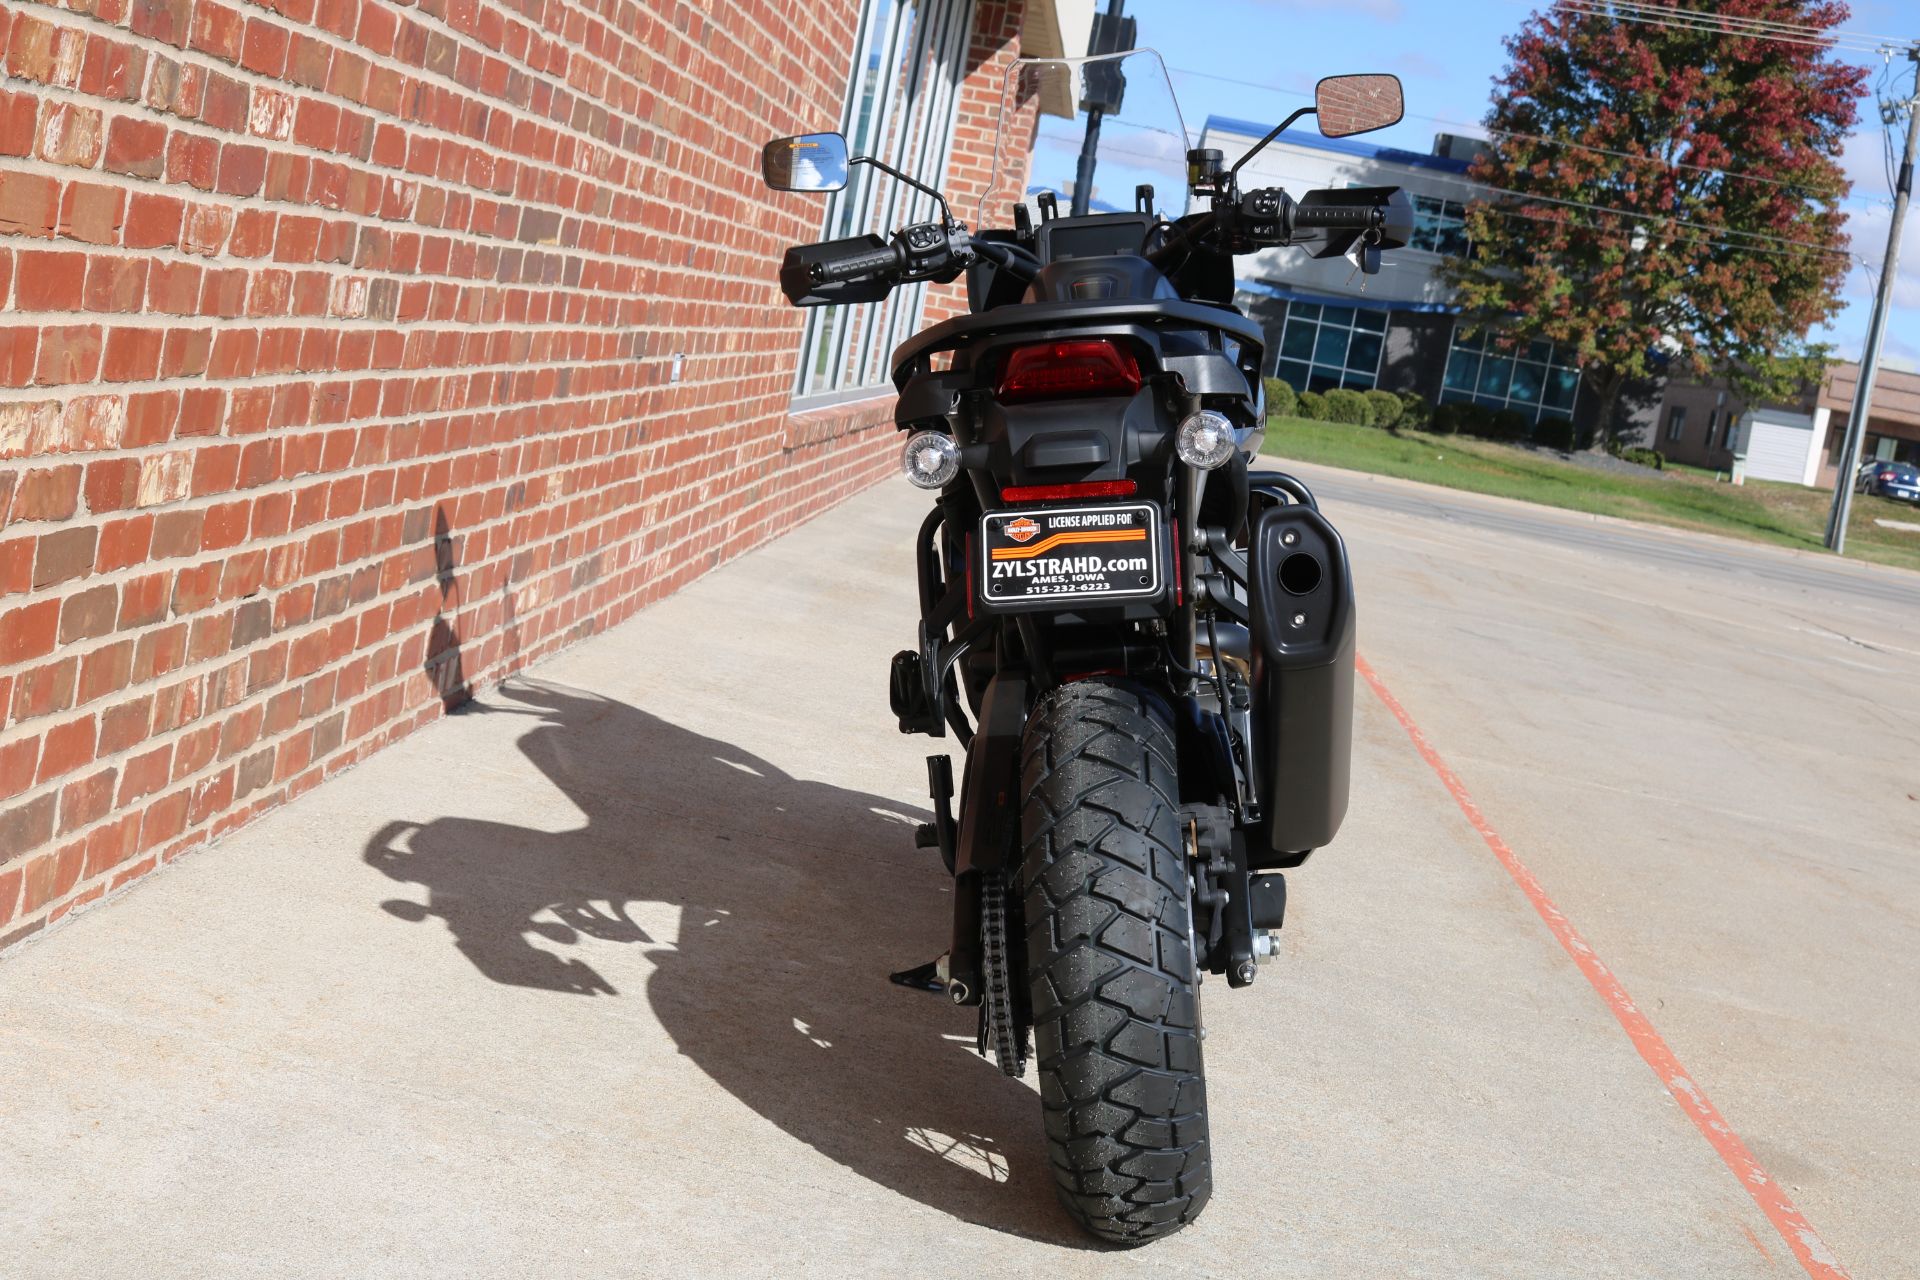 2022 Harley-Davidson Pan America™ 1250 Special in Ames, Iowa - Photo 2